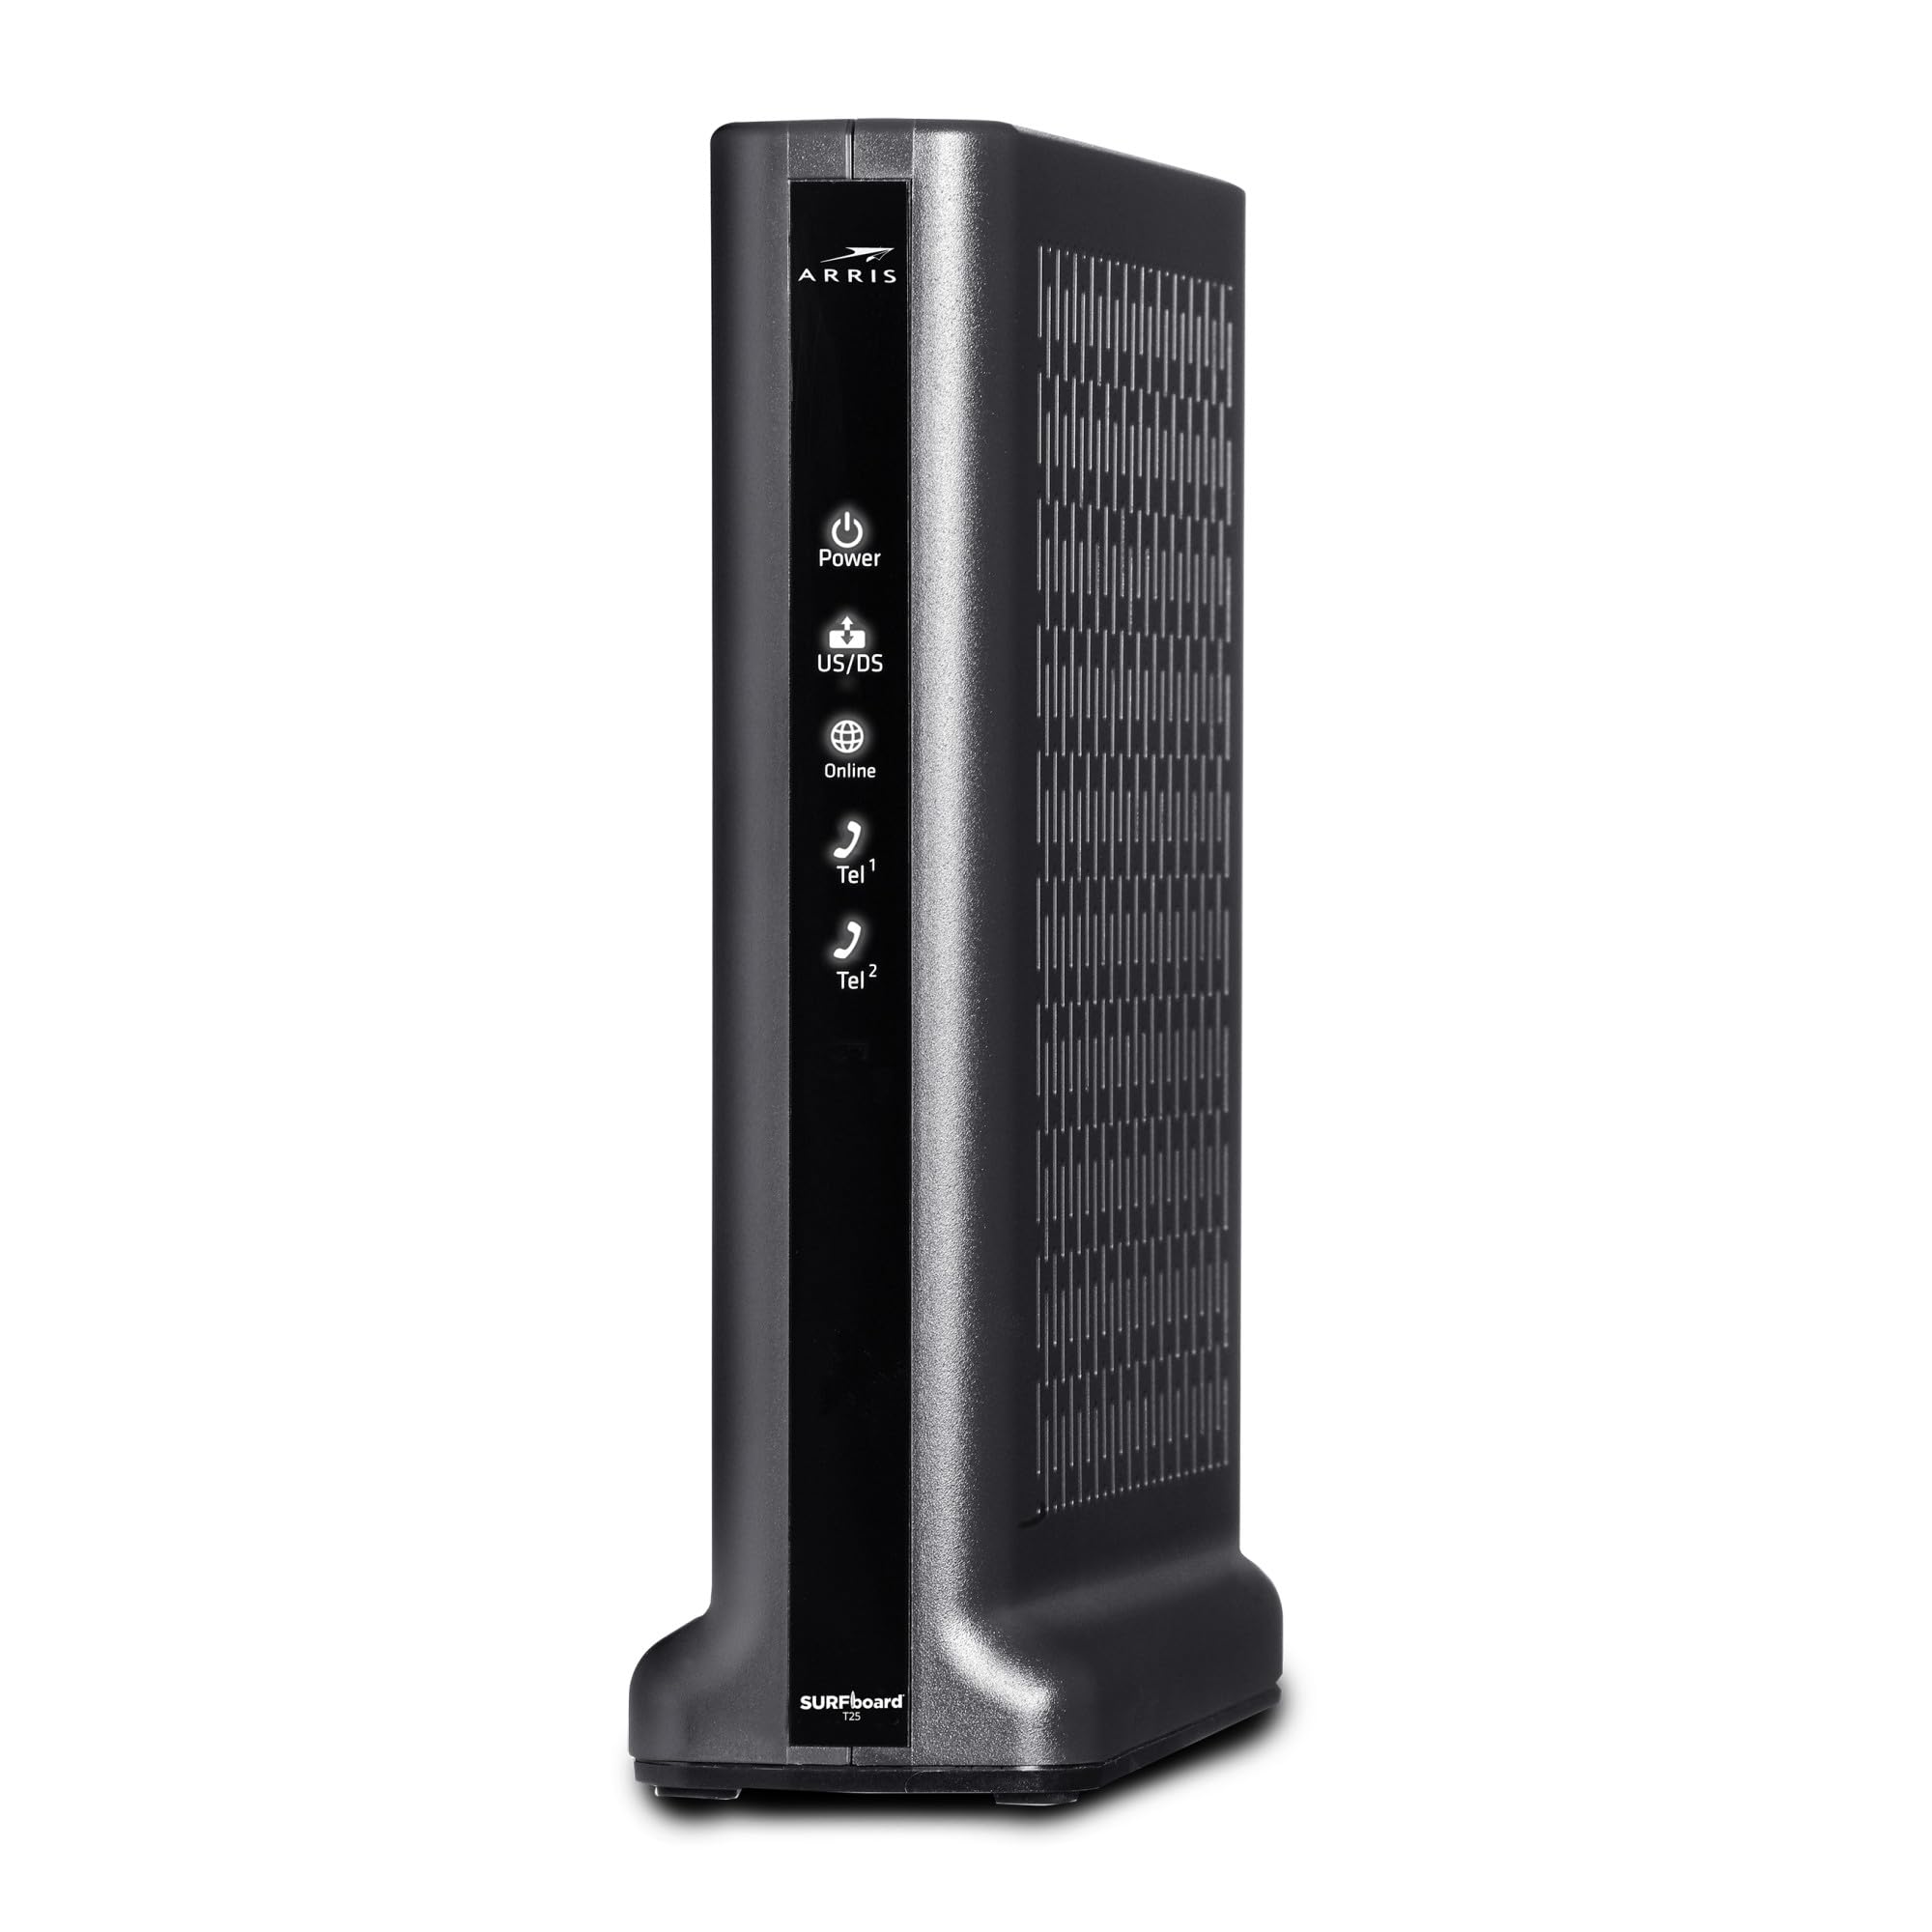 ARRIS SURFboard T25 DOCSIS 3.1 Gigabit Cable Modem | Comcast Xfinity Internet & Voice | Two 1 Gbps Ports | 2 Telephony Ports | 800 Mbps Max with Xfinity Internet Plans | 2 Year Warranty Black